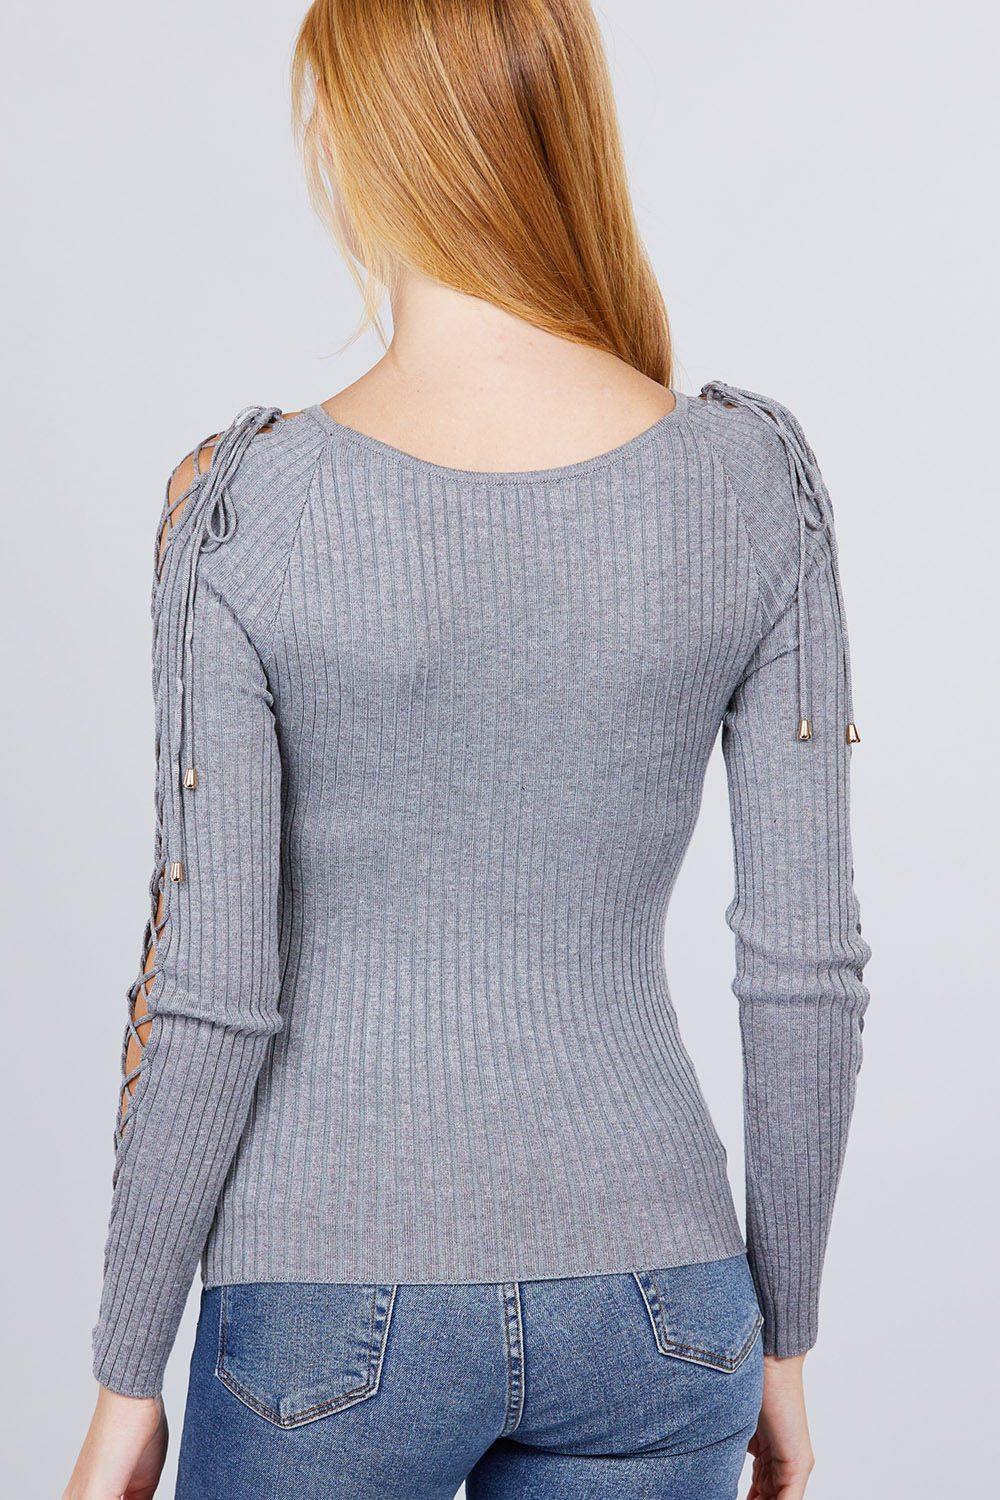 Long Sleeve W/strappy Detail Round Neck Rib Sweater Top - Pearlara